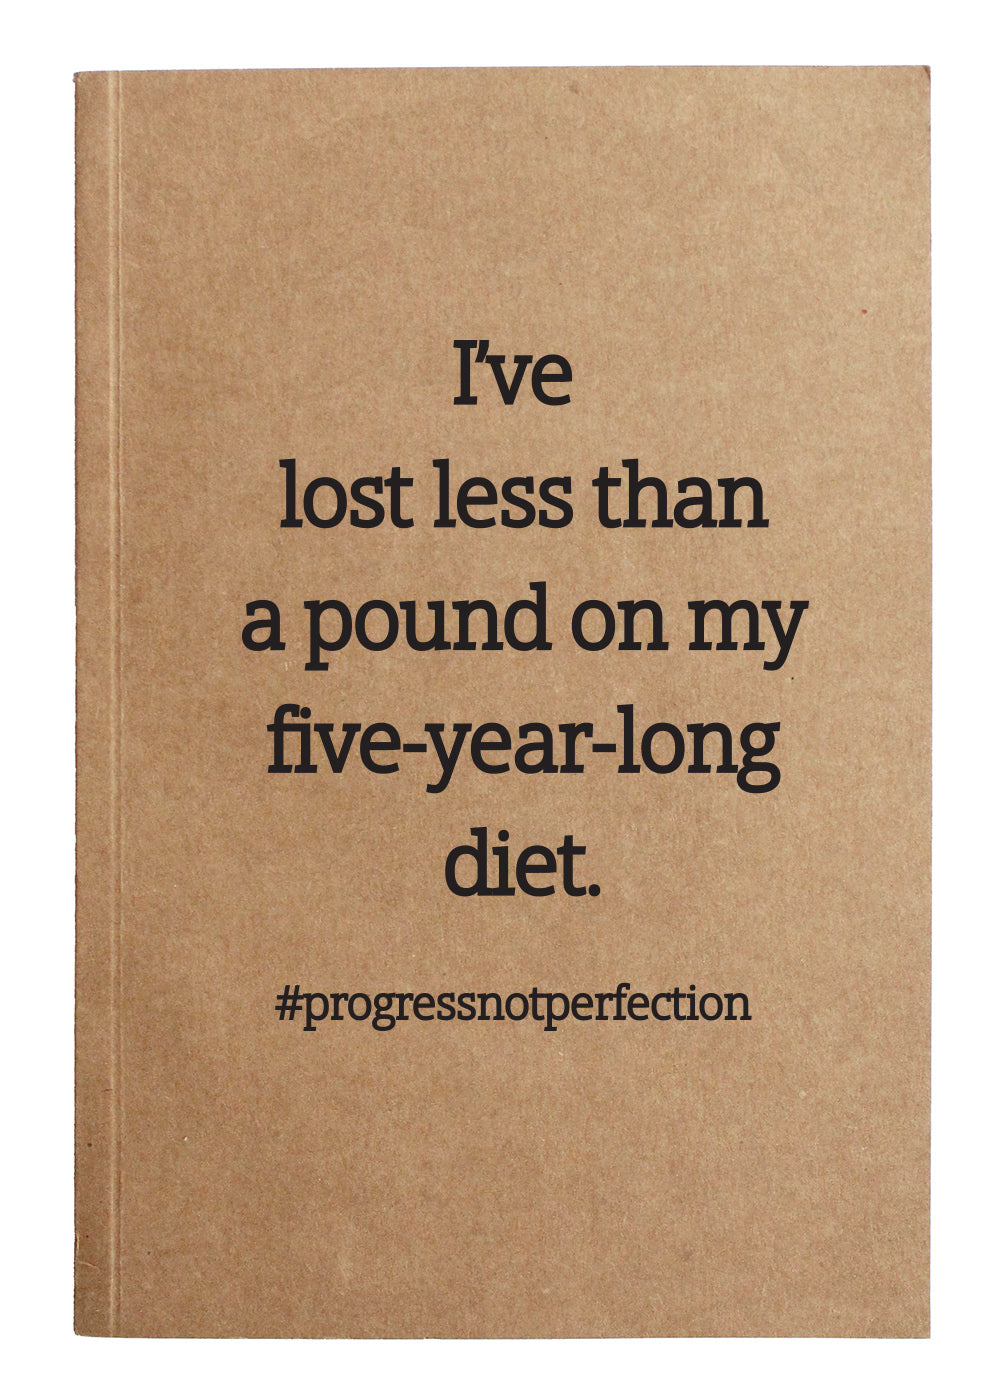 I've loss less than a pound on my five-year long diet. #progressnotperfection kraft notebook